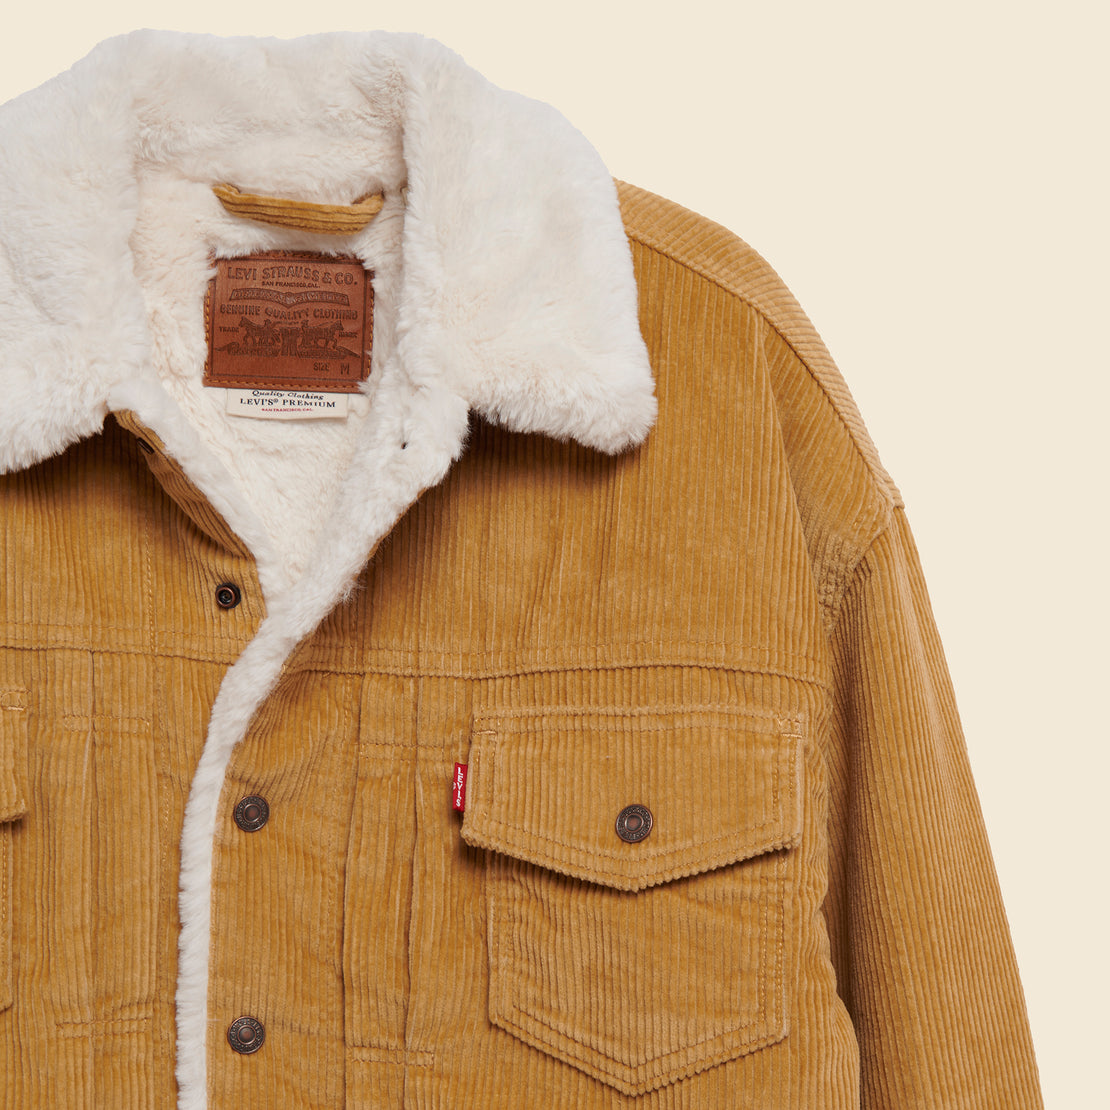 New Heritage Sherpa Jacket - Iced Coffee Corduroy - Levis Premium - STAG Provisions - W - Outerwear - Coat/Jacket